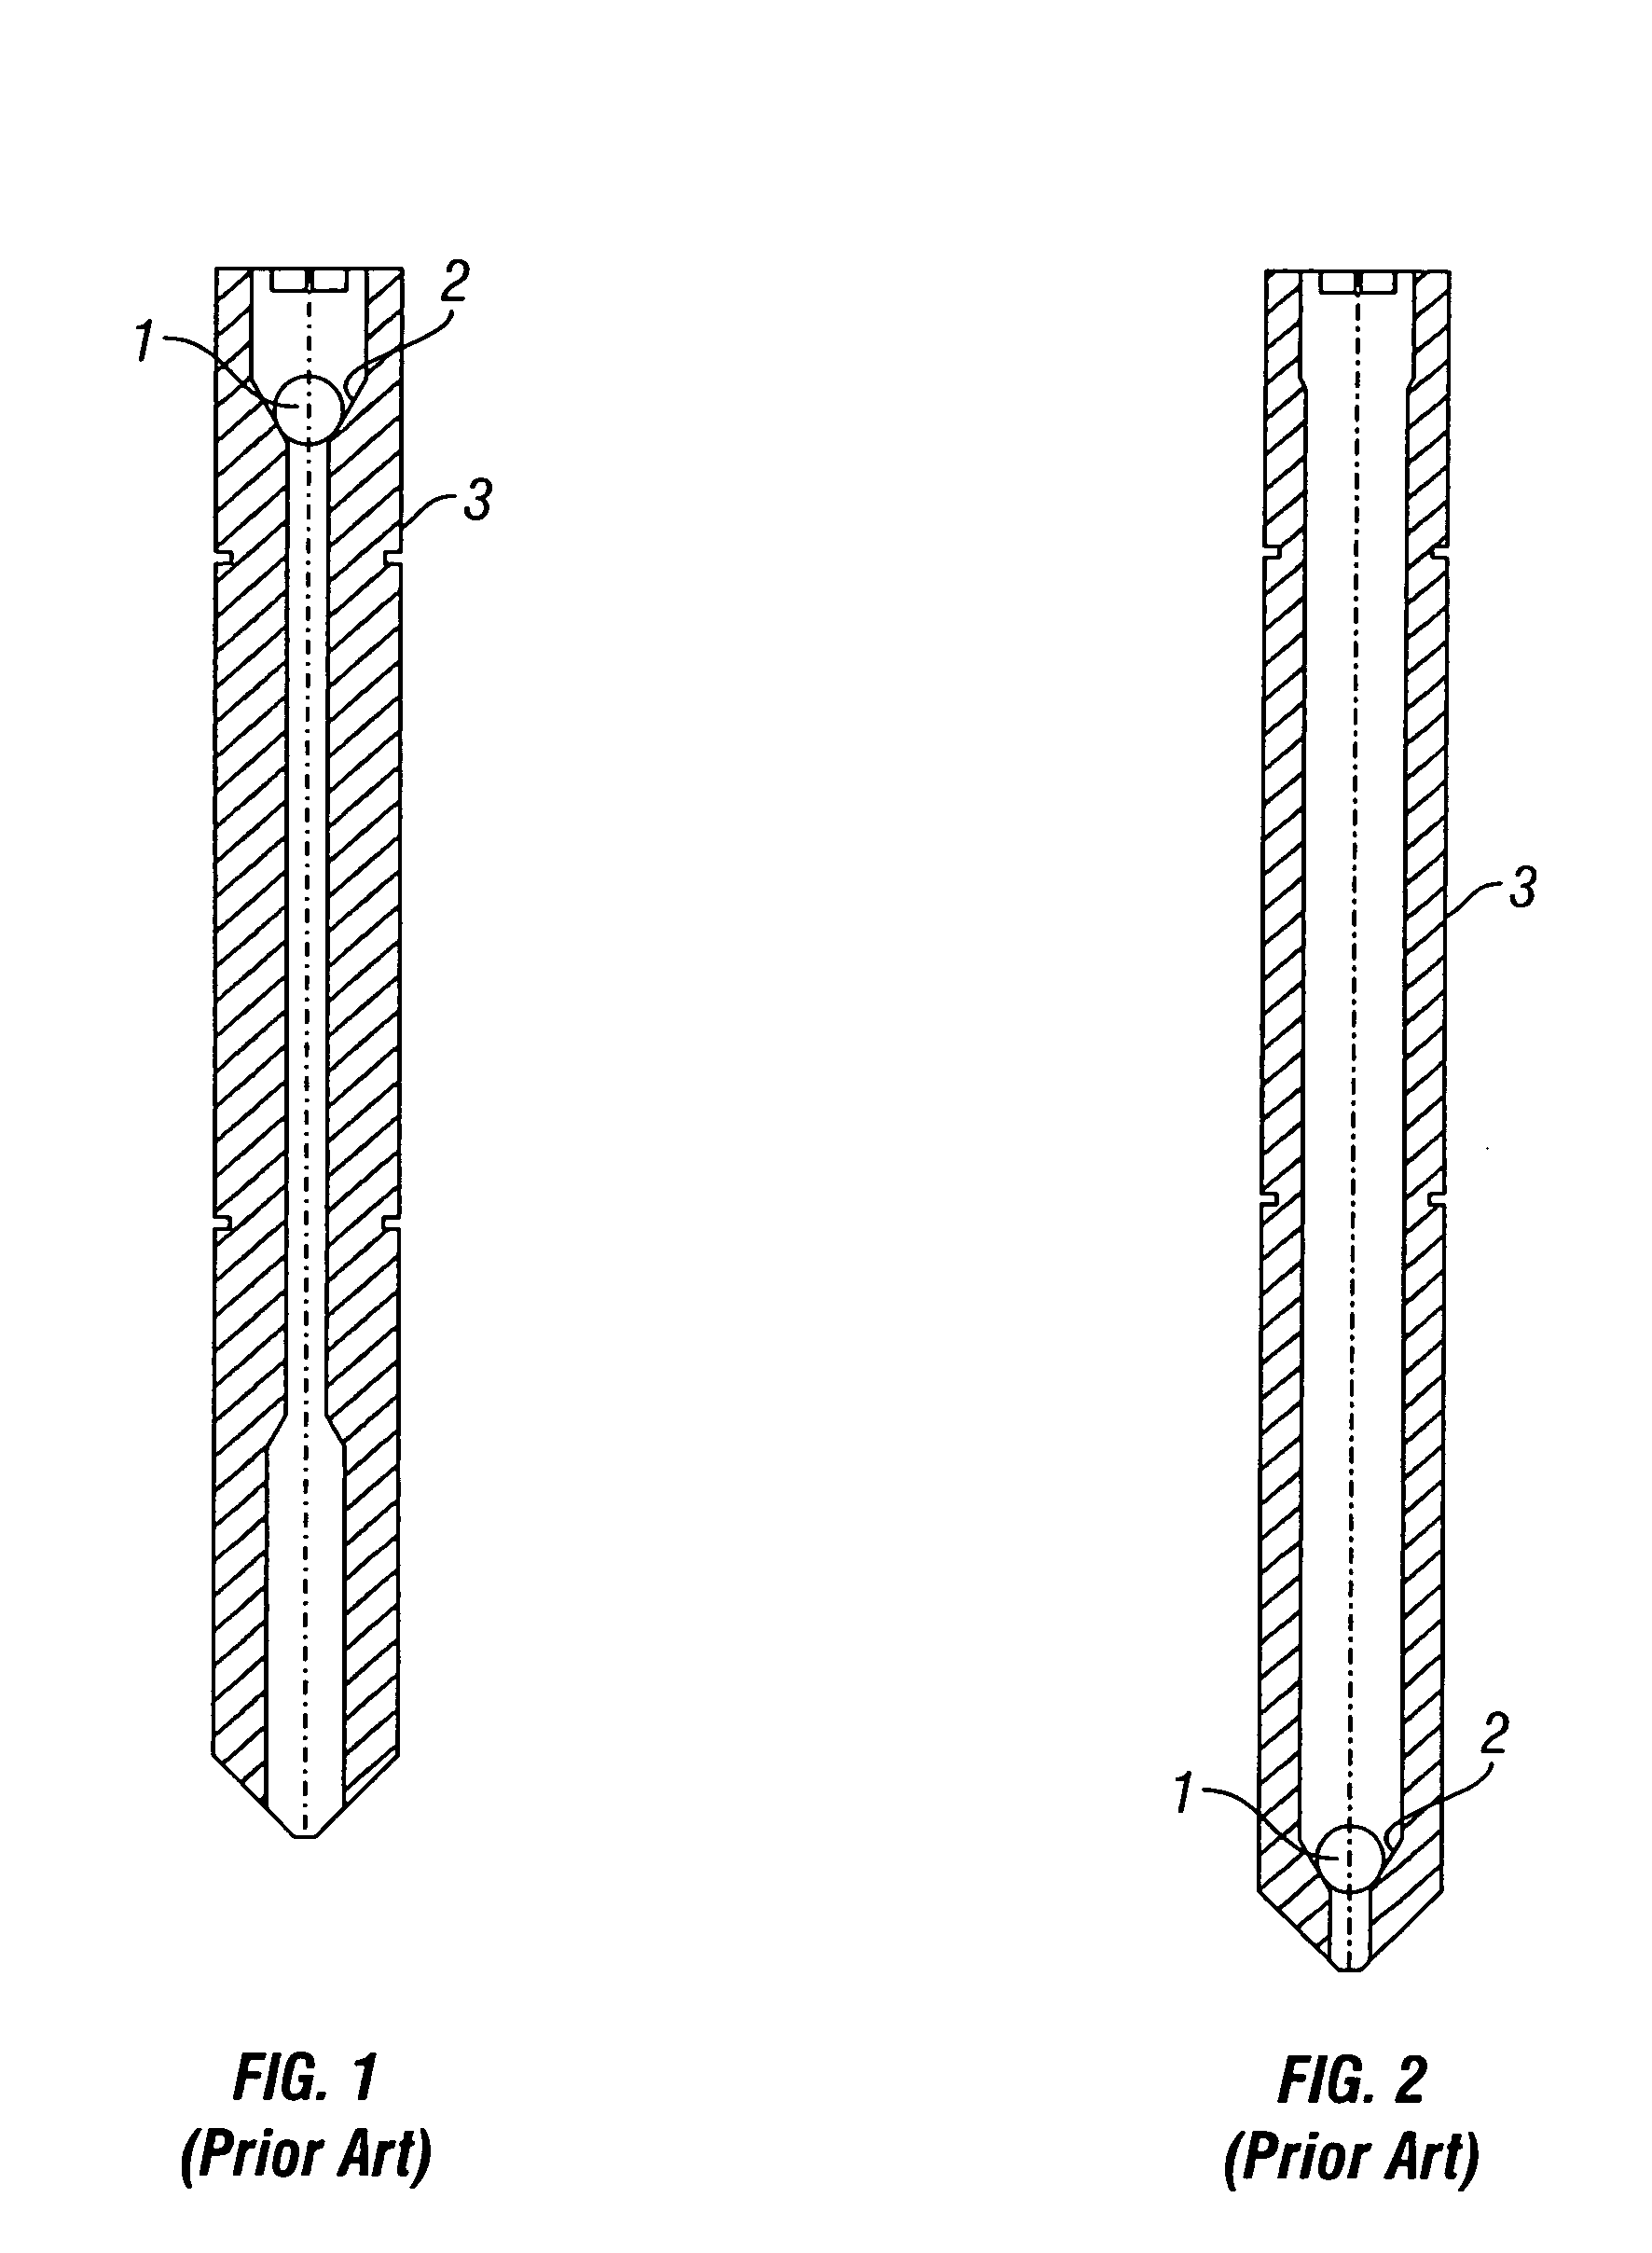 Gravity valve for a downhole tool